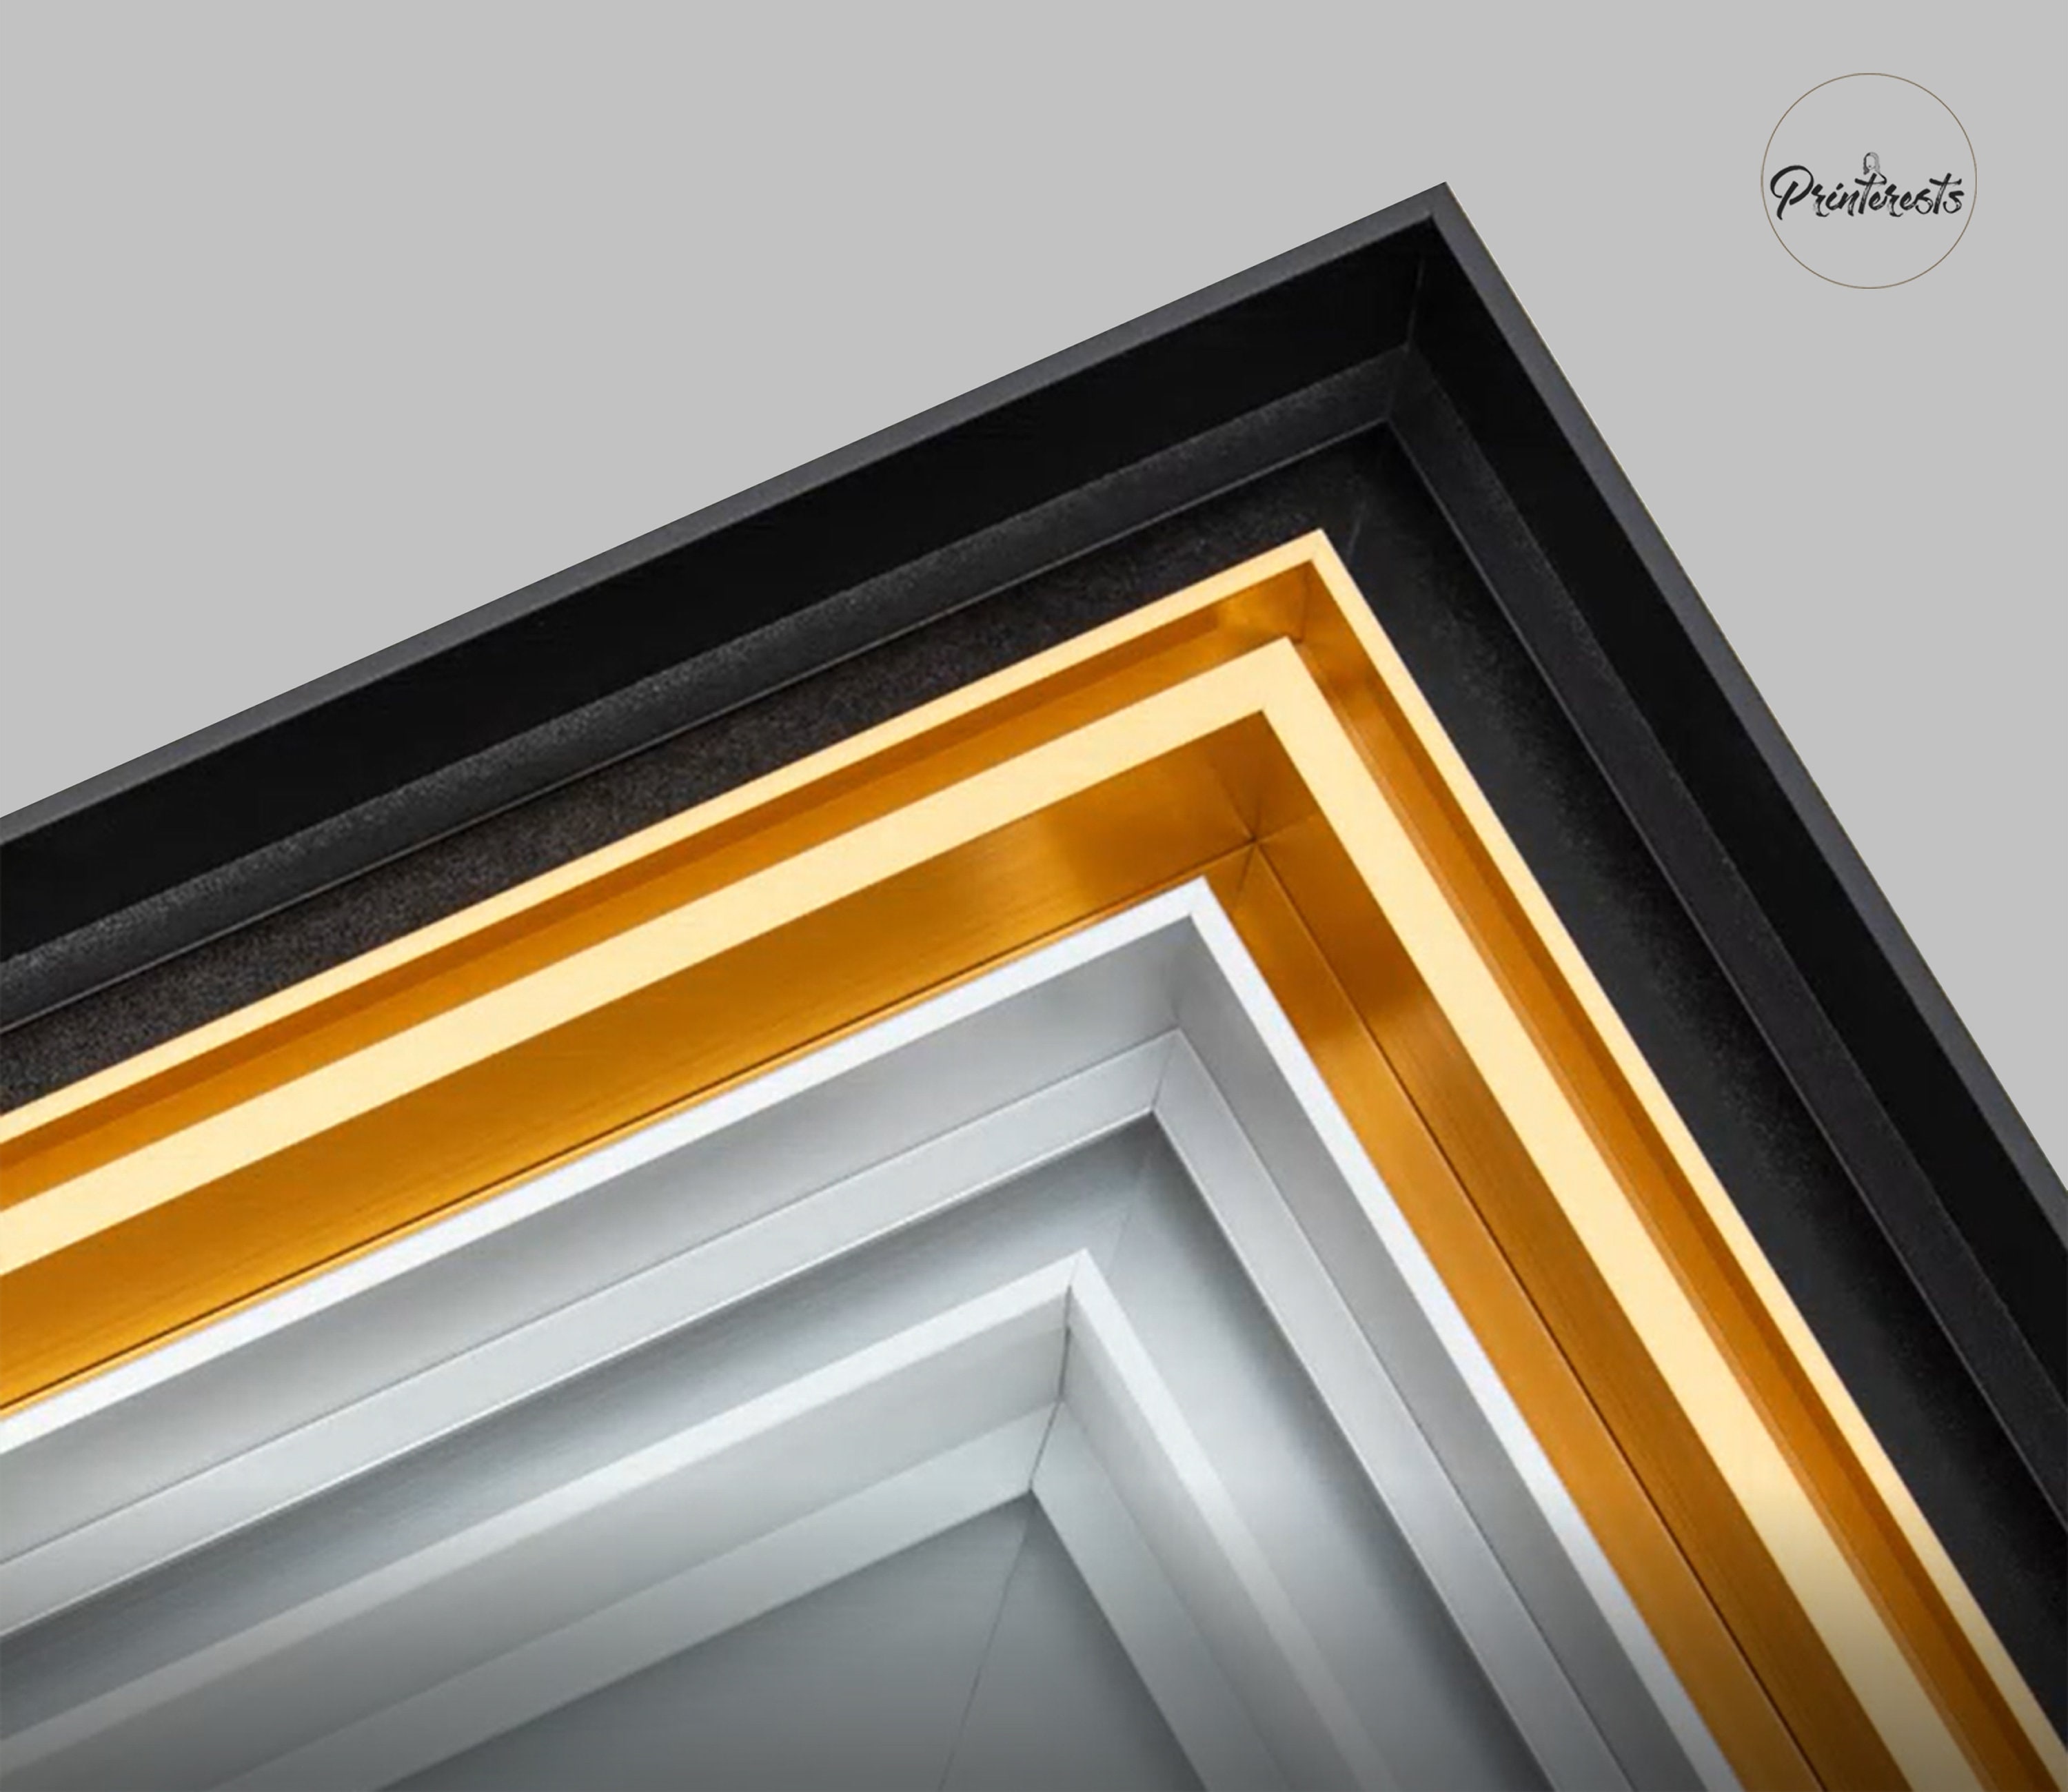 12x16 Canvas Print, Floating Gold Frame - Canvas On Demand®